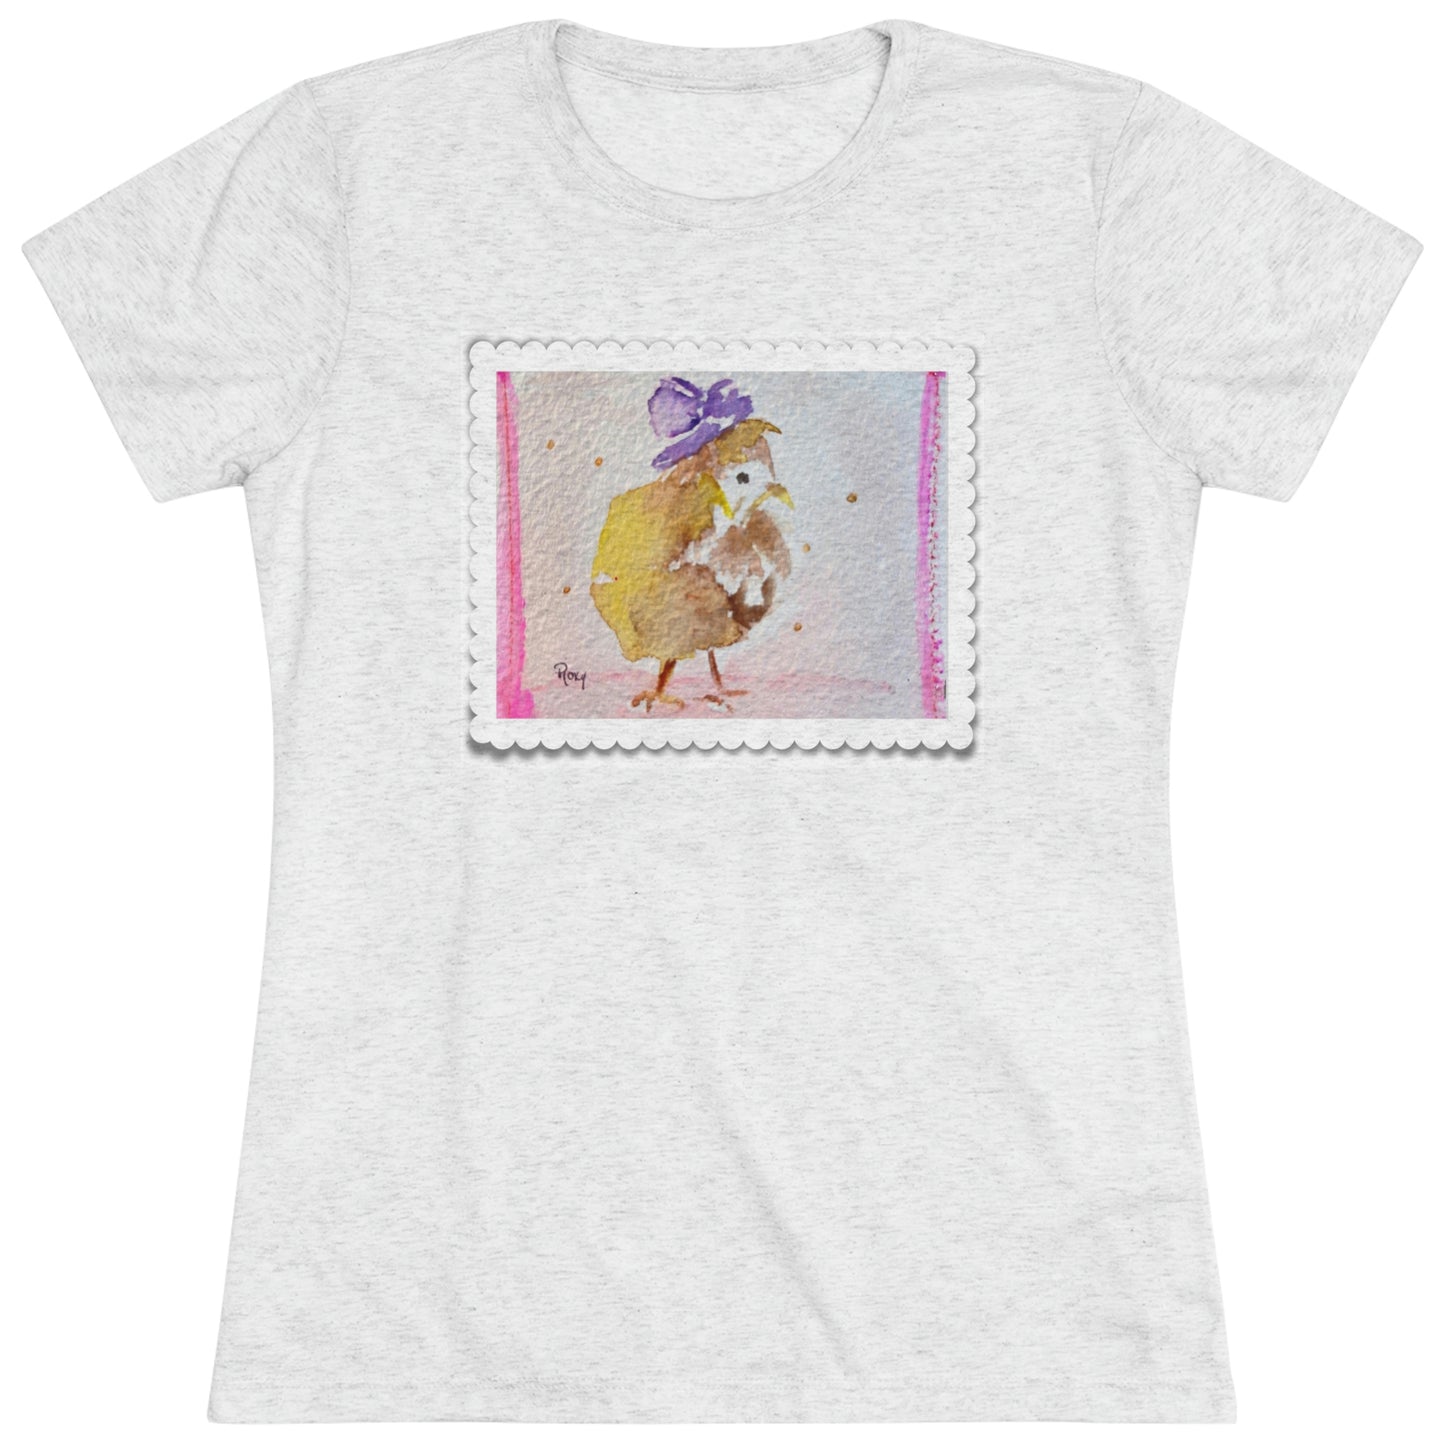 Fascinating Chick Women's fitted Triblend Tee  tee shirt